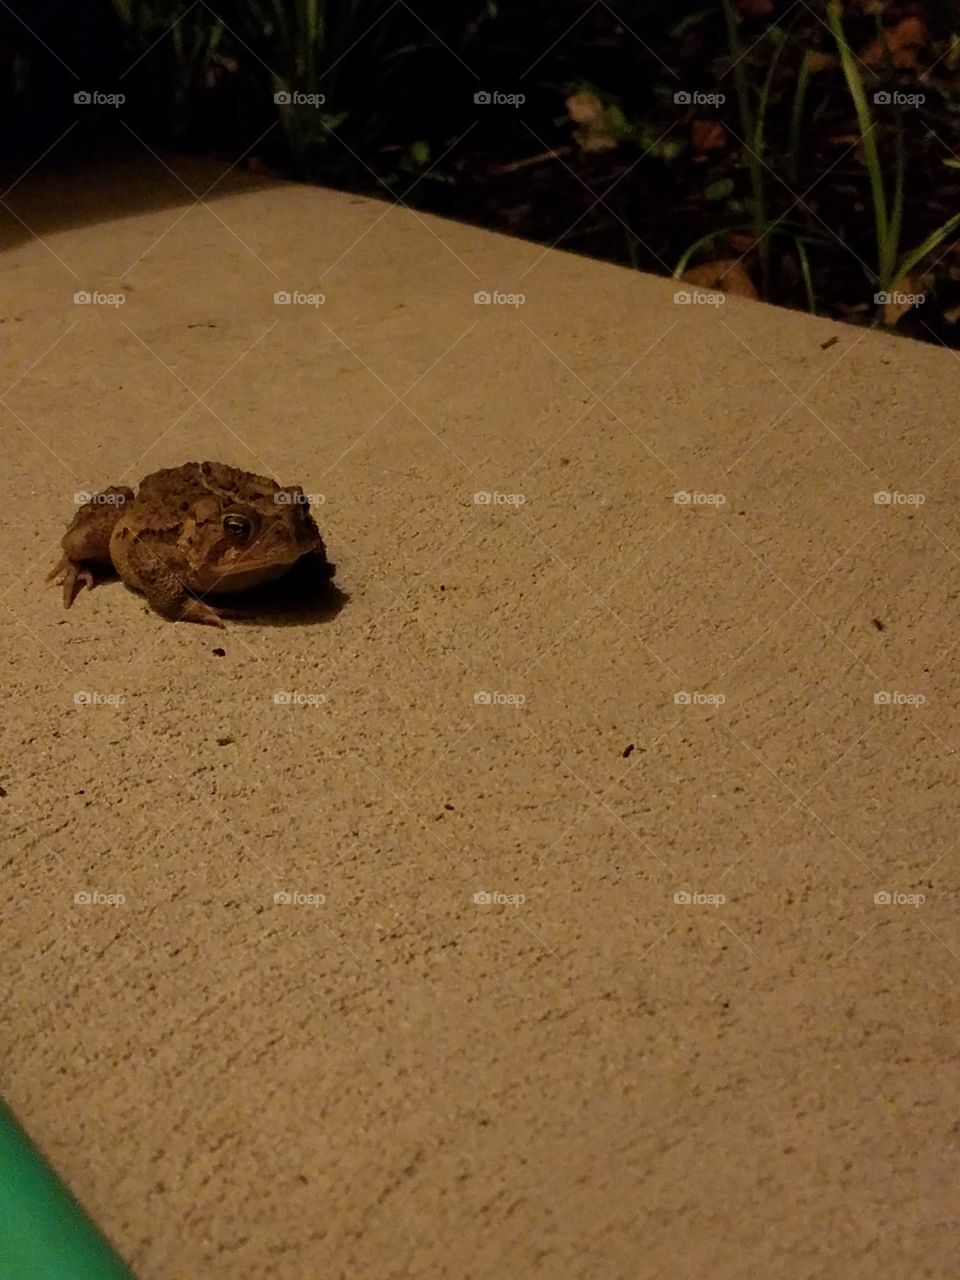 Frog waiting for dinner on a porch